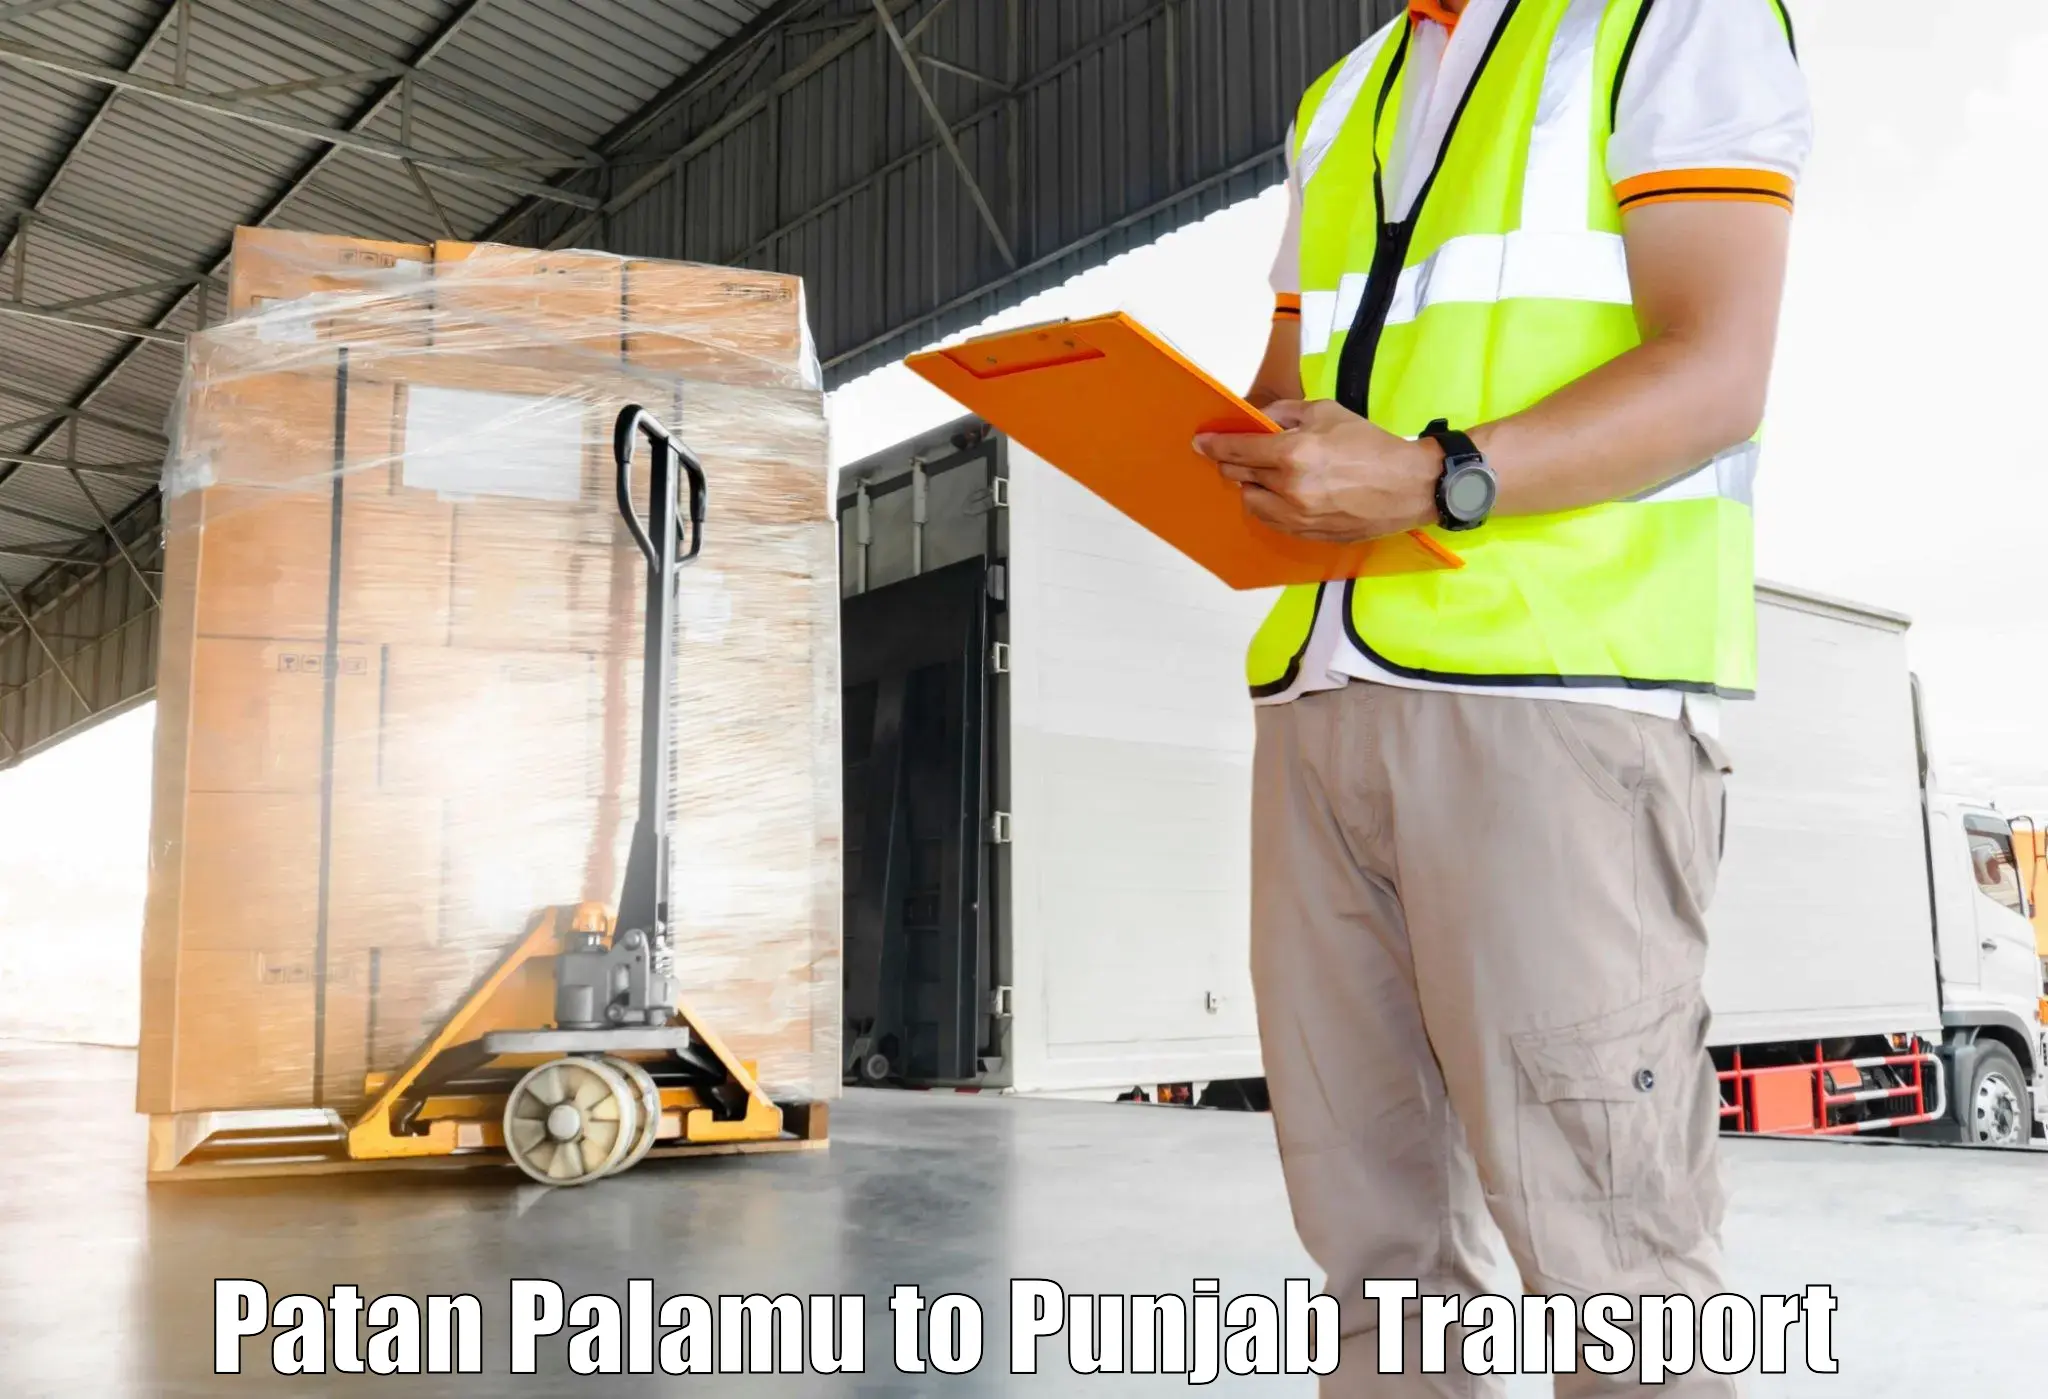 Goods delivery service Patan Palamu to Sultanpur Lodhi